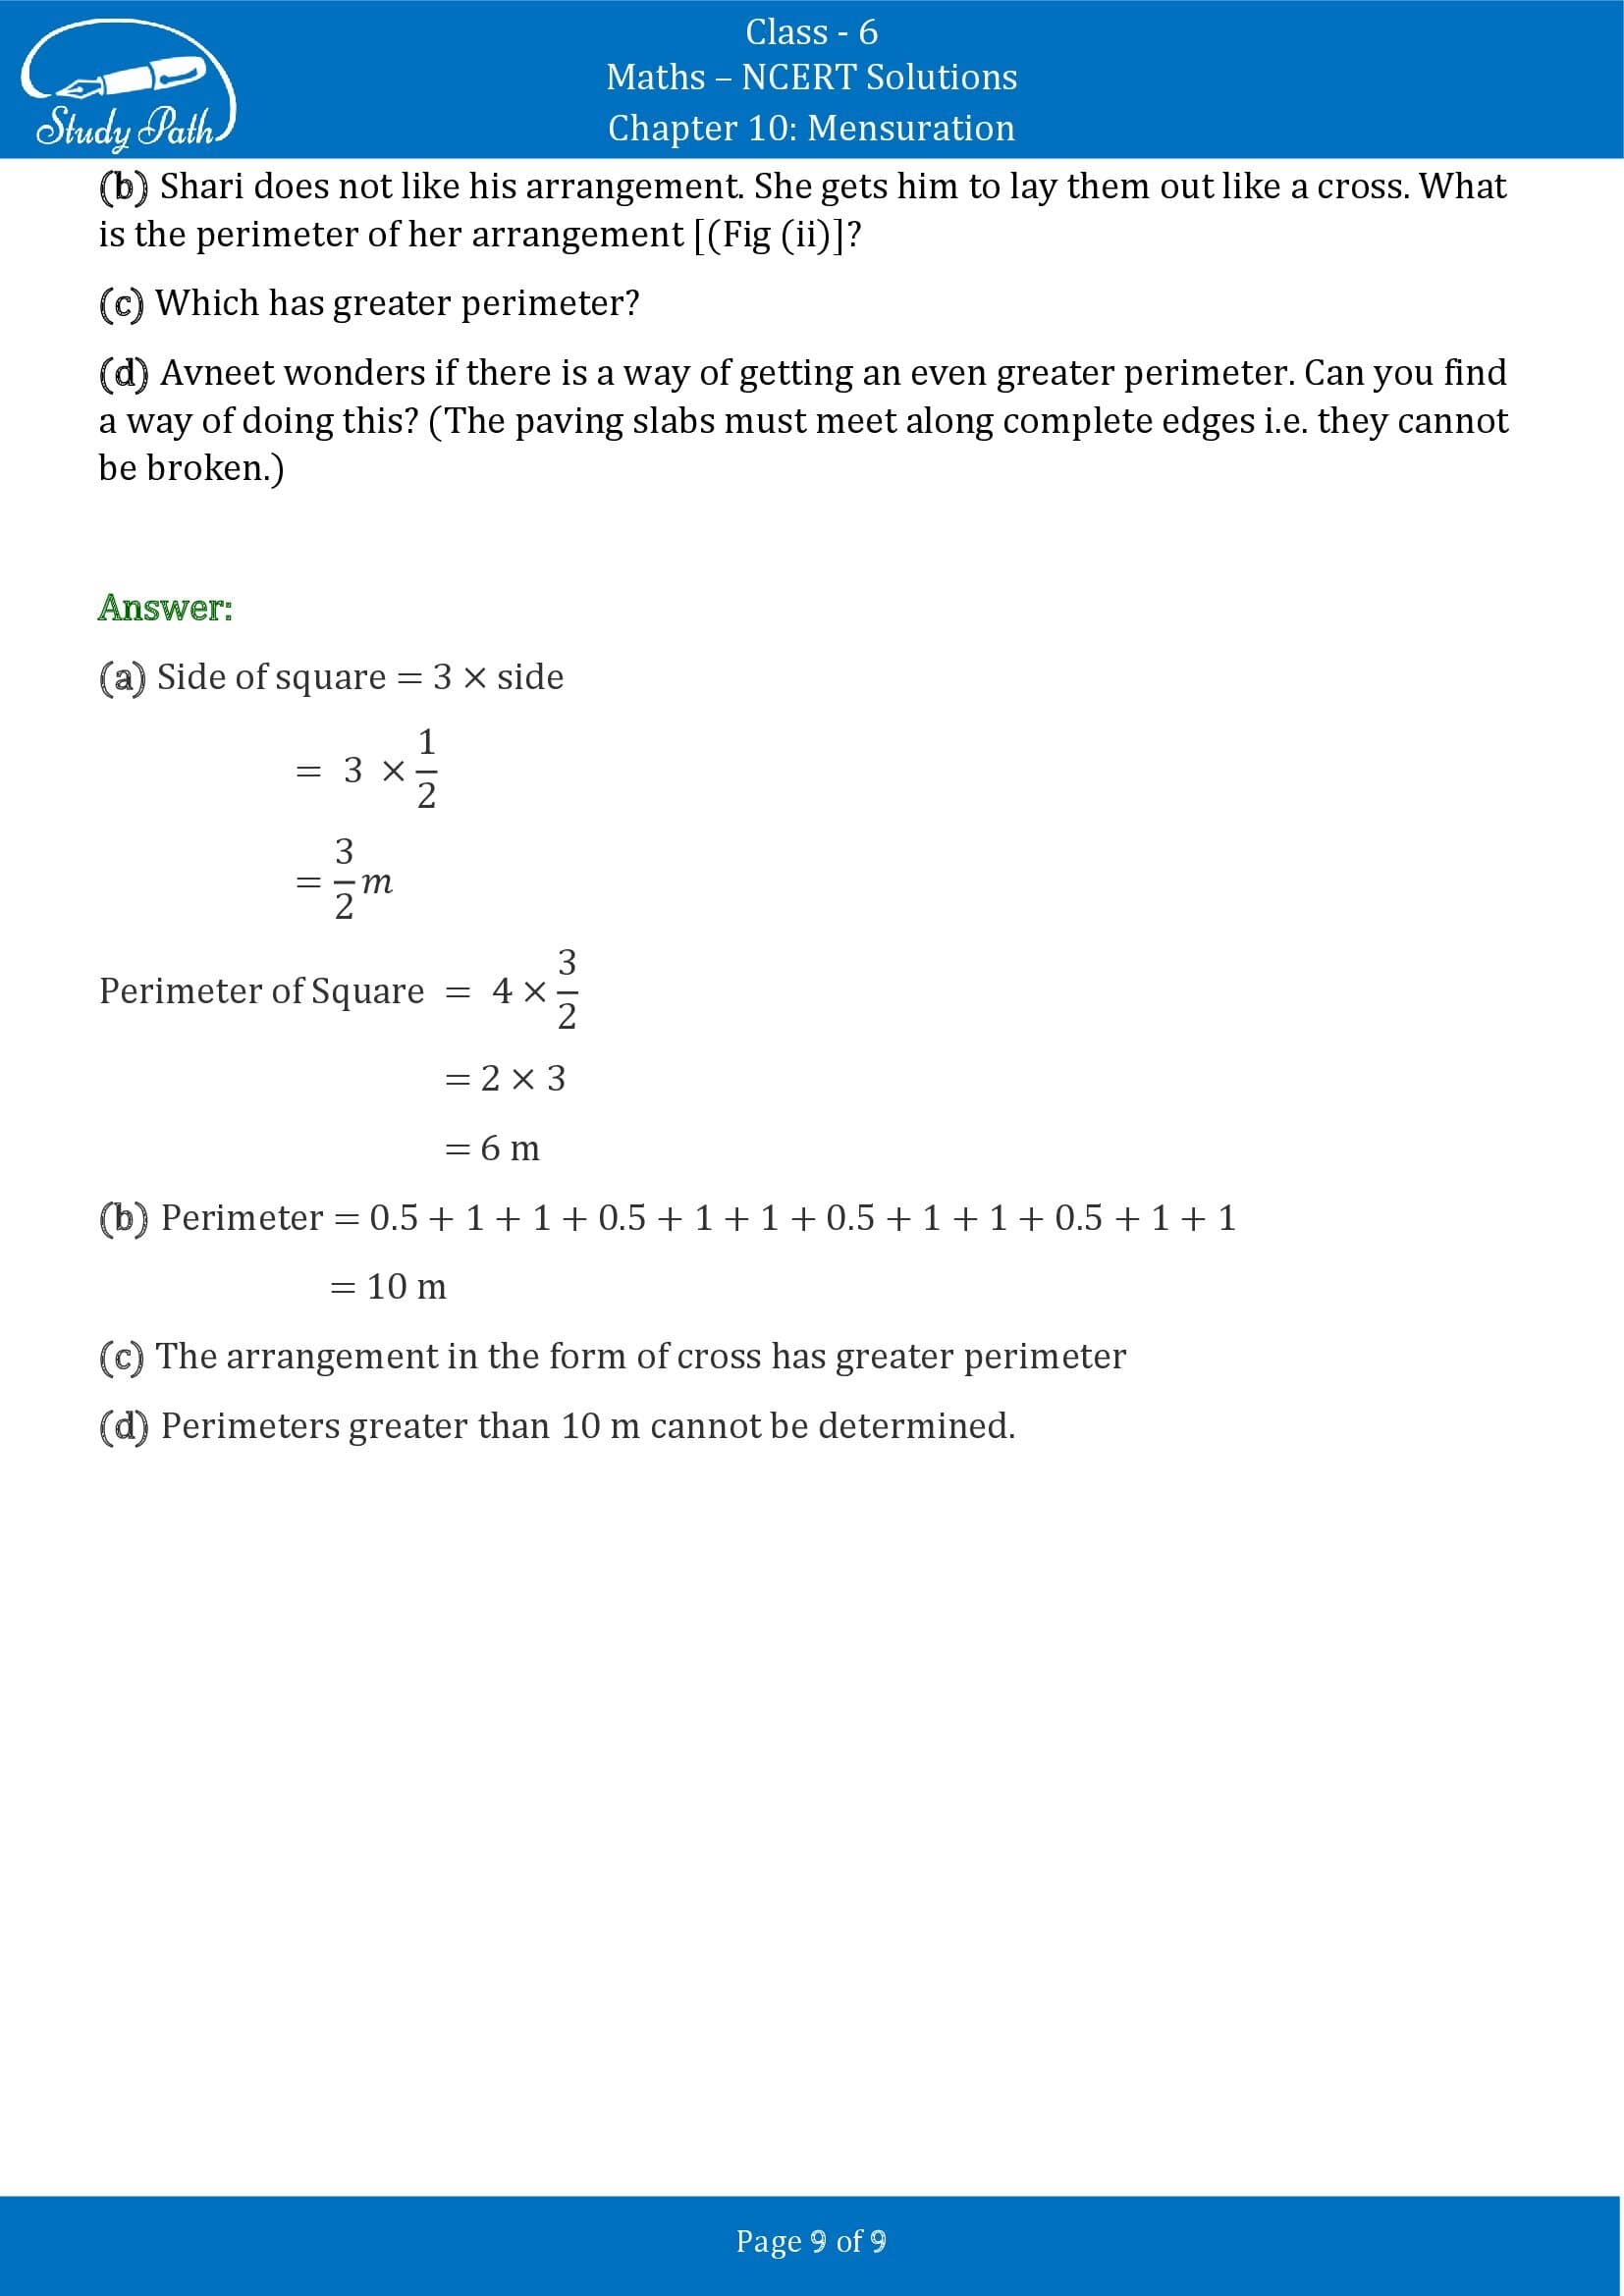 NCERT Solutions for Class 6 Maths Chapter 10 Mensuration Exercise 10.1 00009